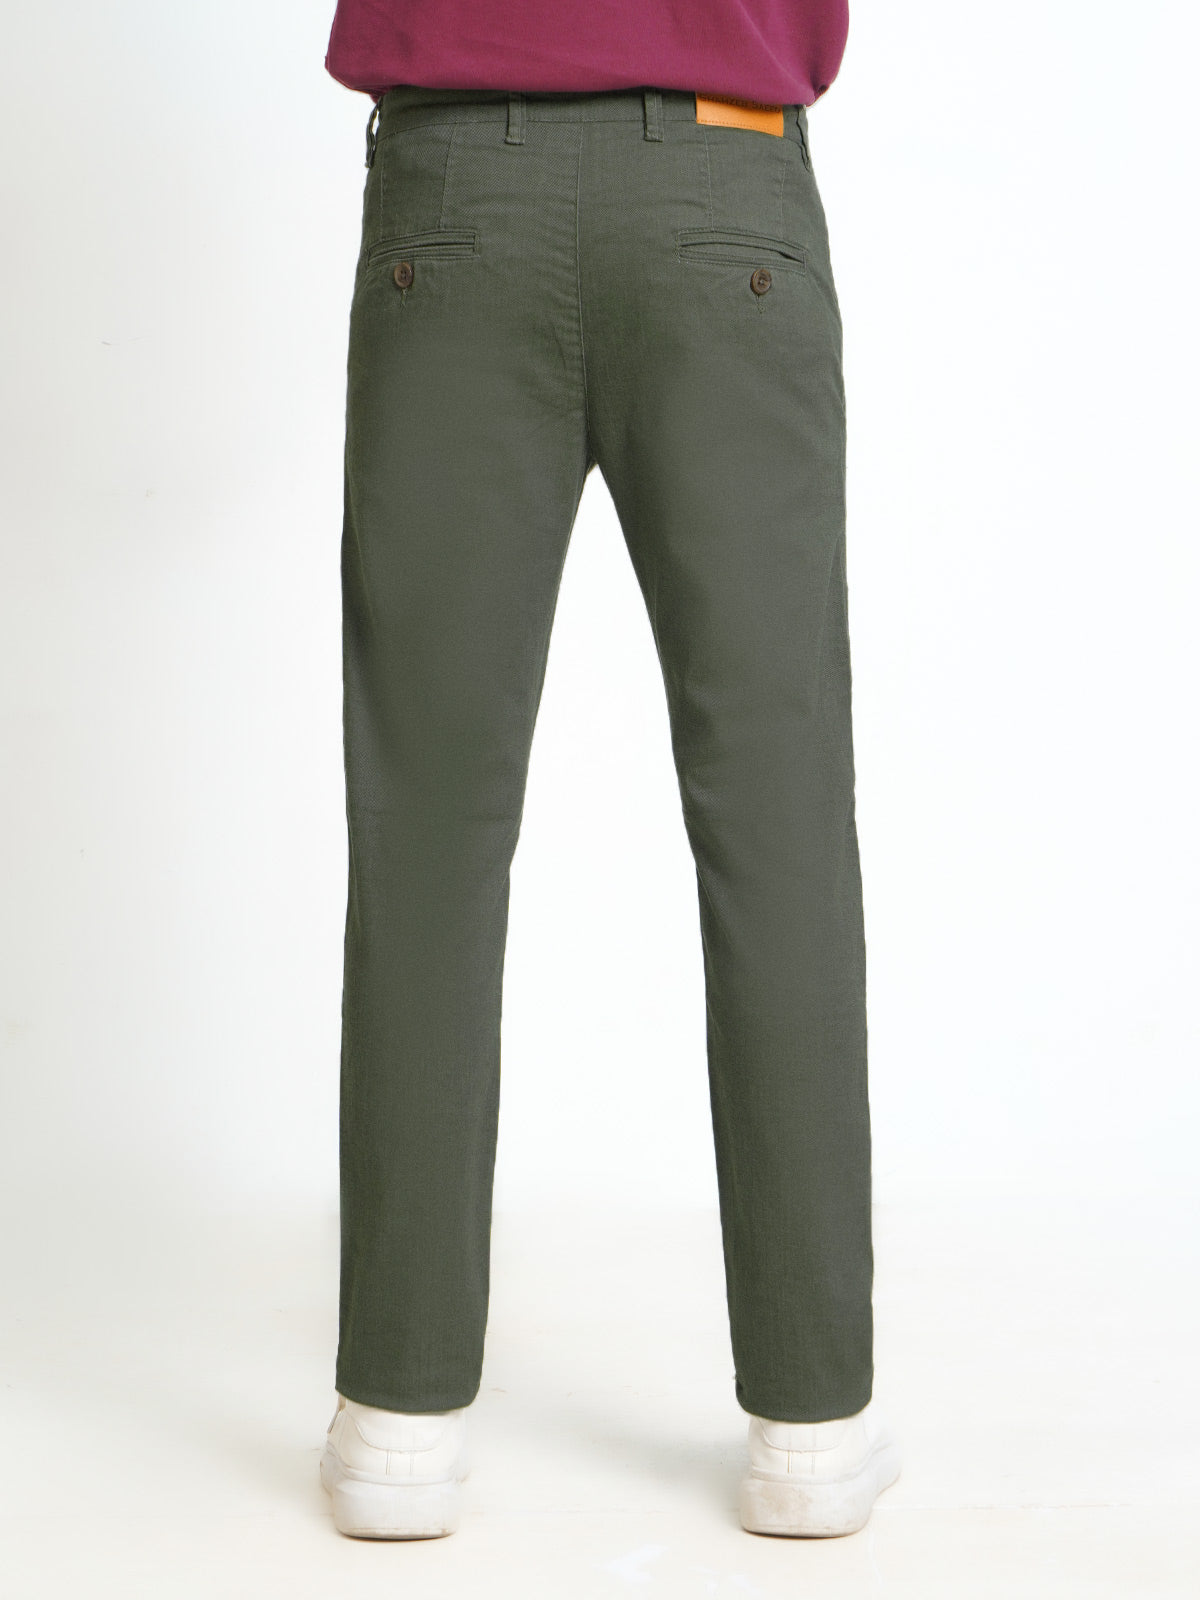 Olive Green Cotton Chino Pant-31